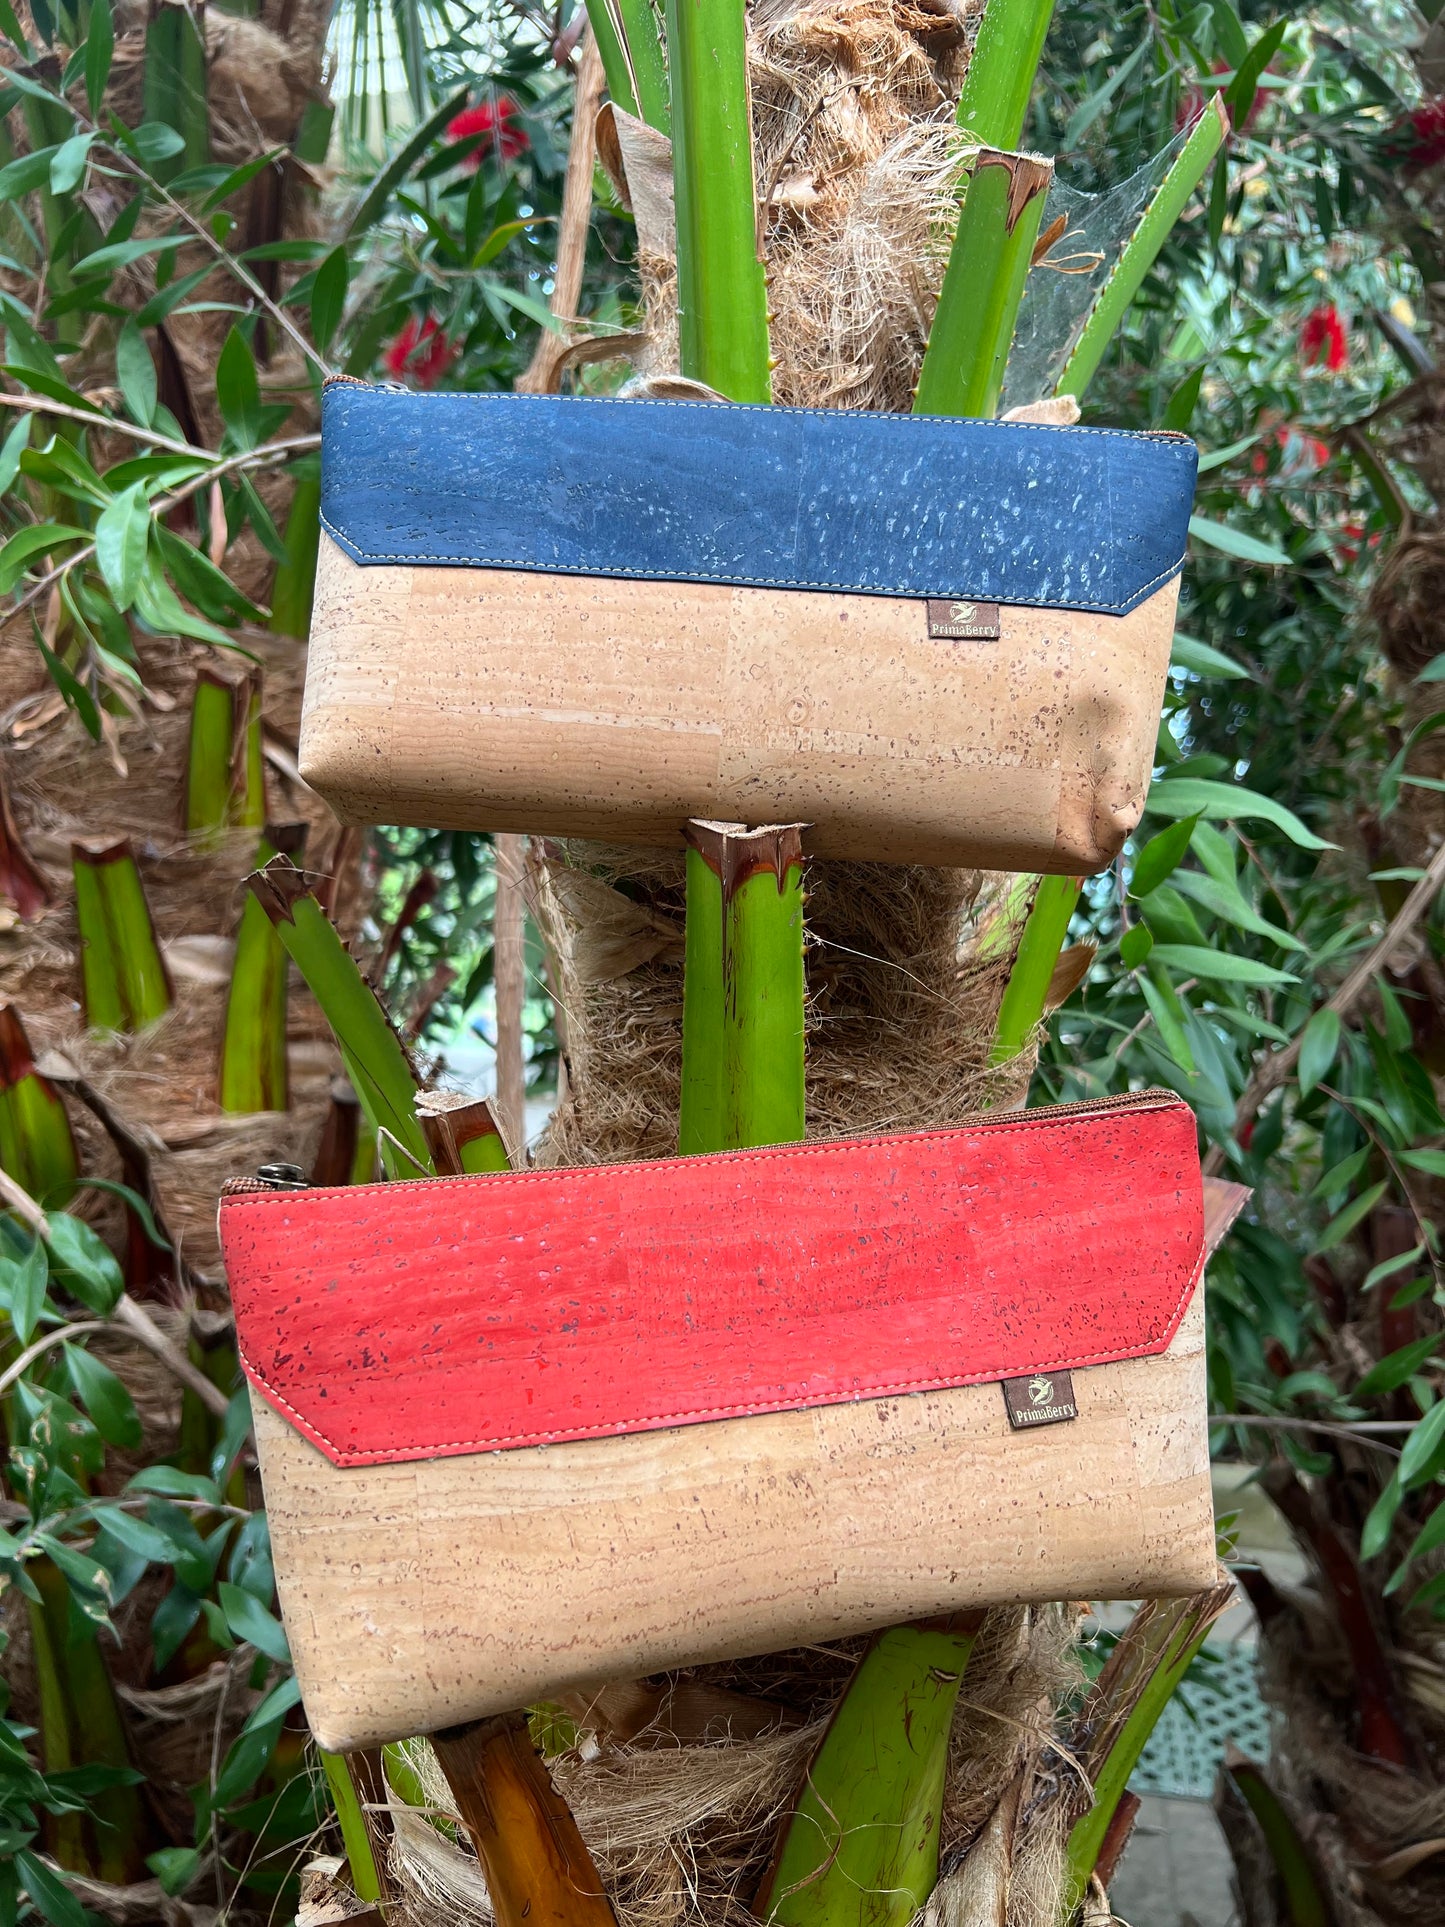 Sea Red Cork Cosmetic Bag: Sustainable and Stylish Travel Bag Made from Premium Cork